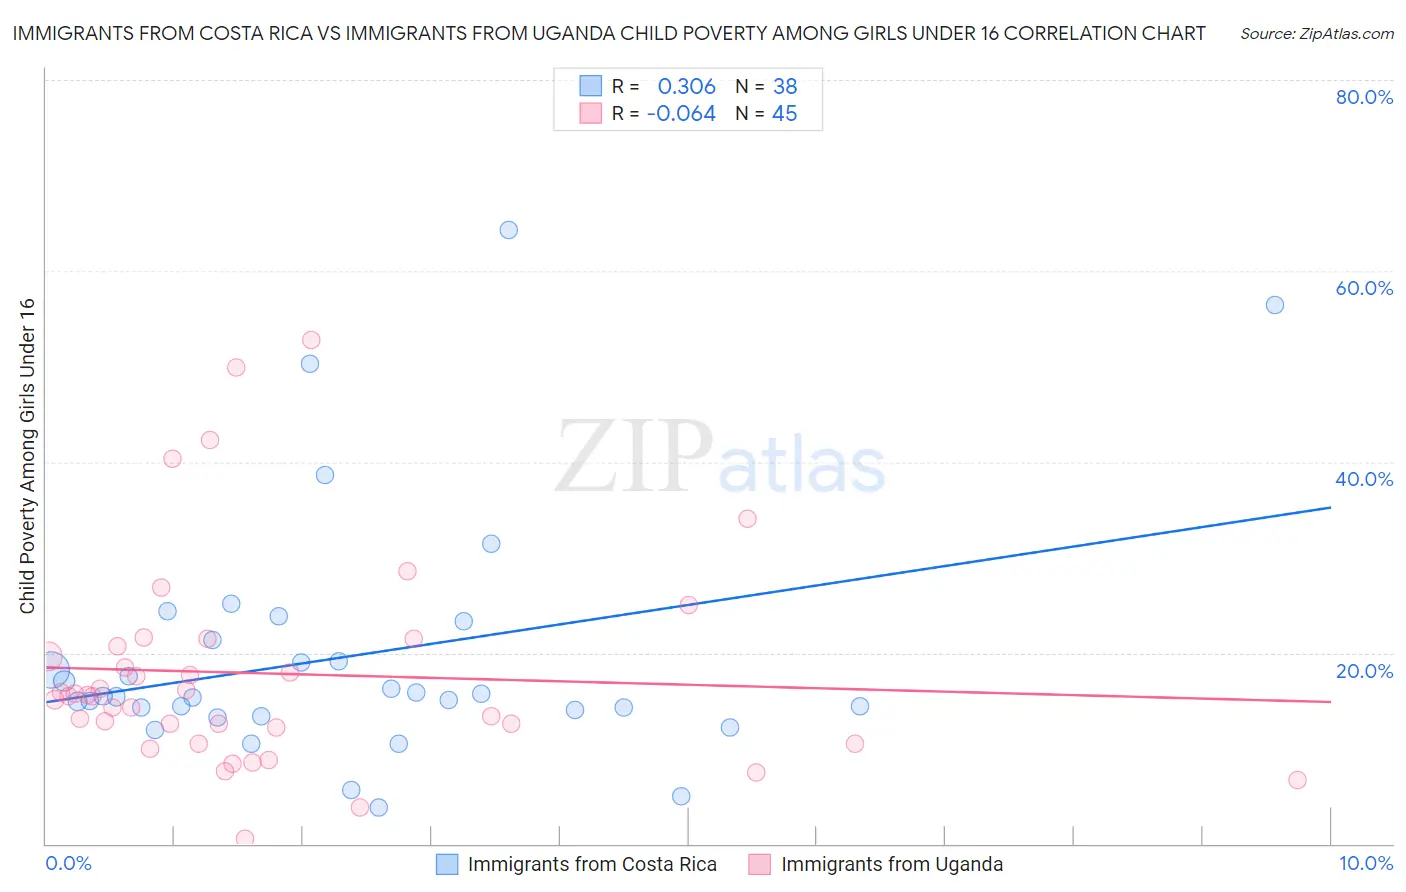 Immigrants from Costa Rica vs Immigrants from Uganda Child Poverty Among Girls Under 16